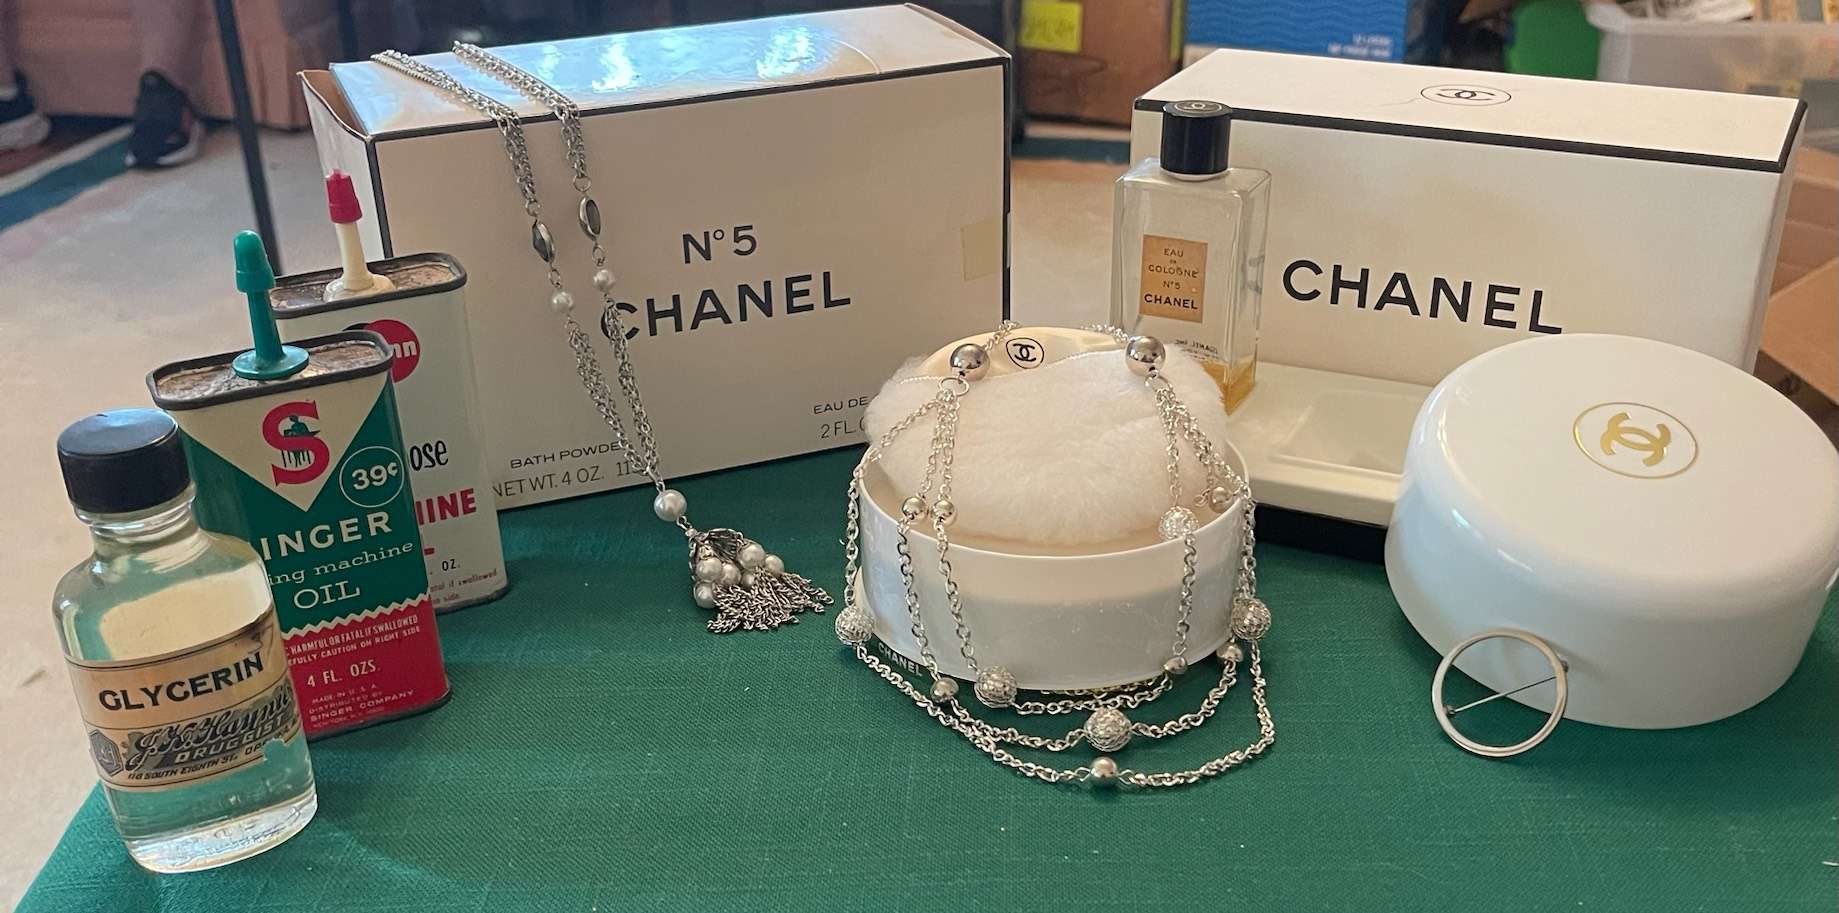 coco chanel gift sets